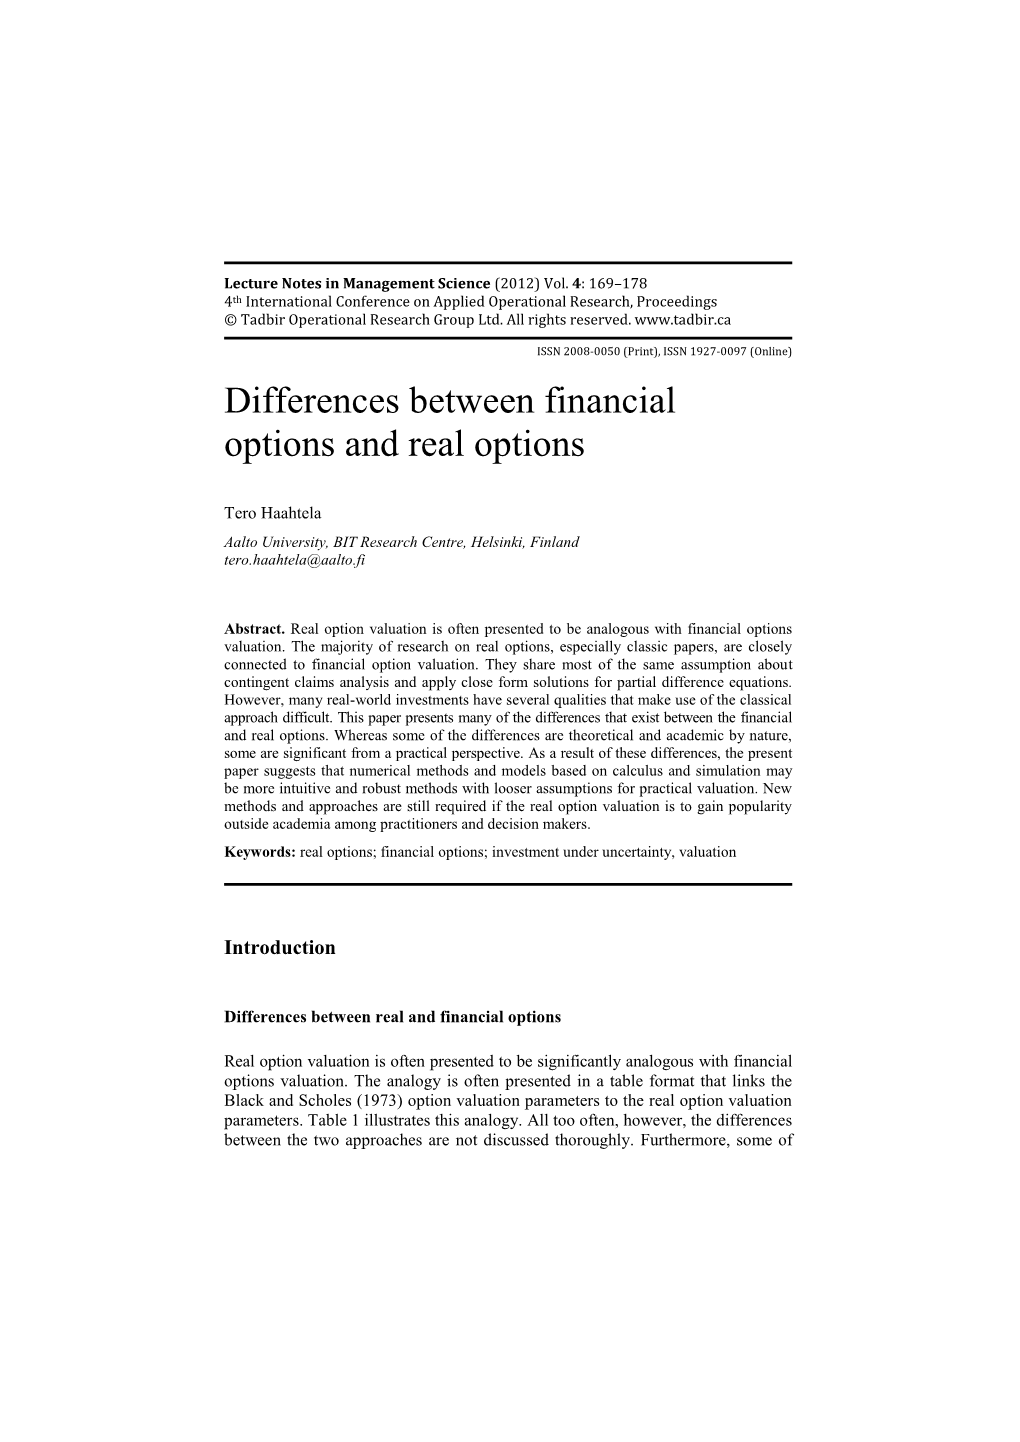 Differences Between Financial Options and Real Options